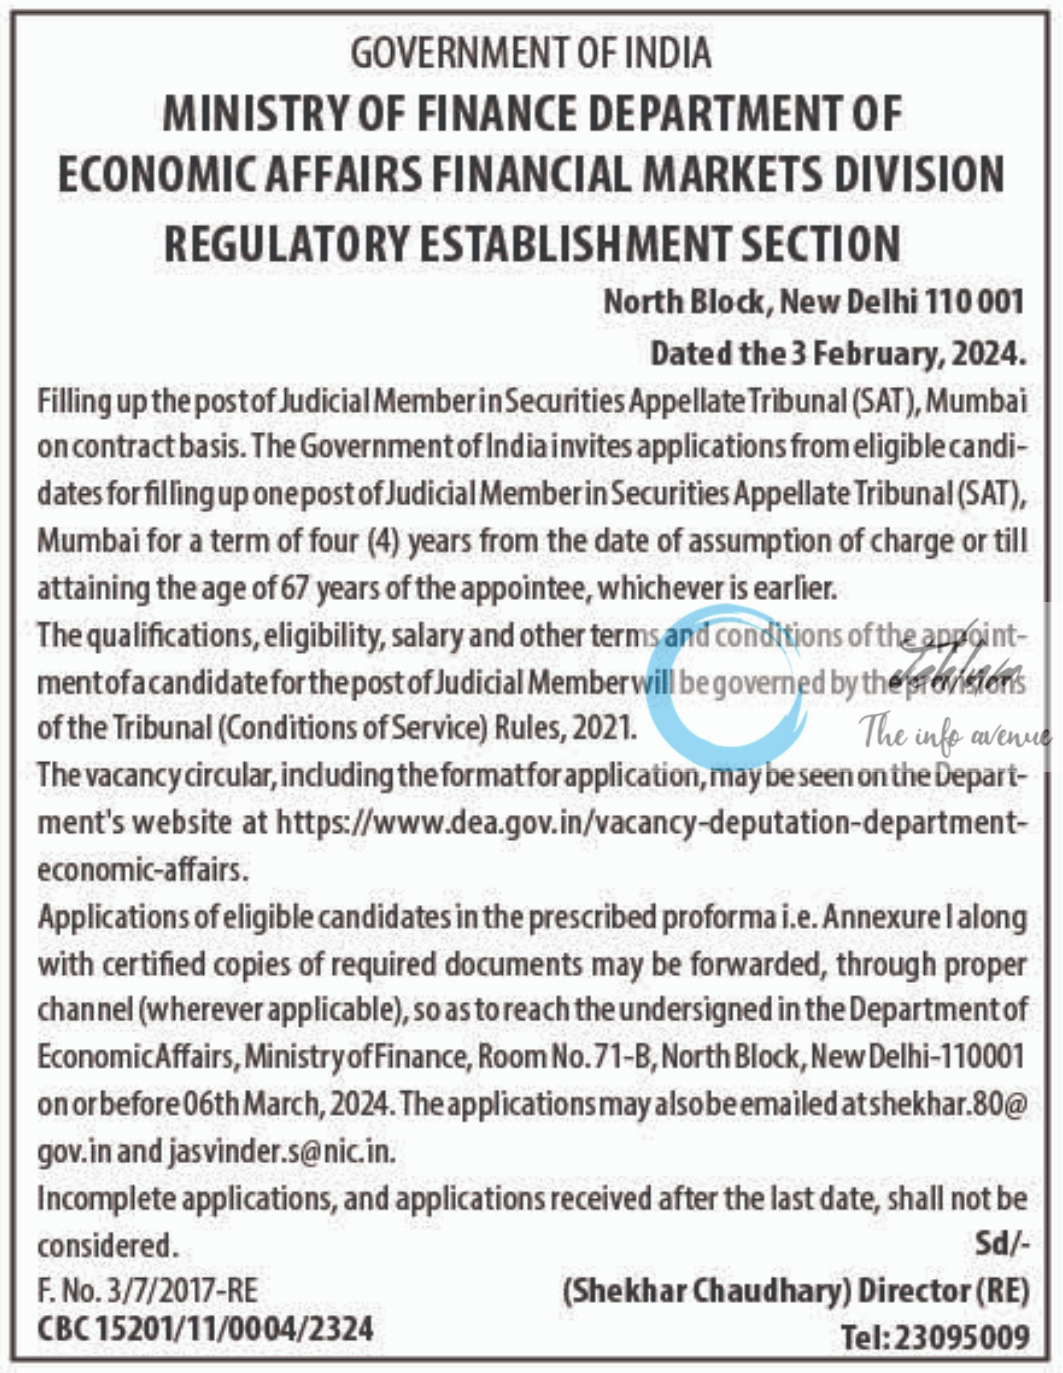 MINISTRY OF FINANCE DEPARTMENT OF ECONOMIC AFFAIRS FINANCIAL MARKETS VACANCY ADVERTISEMENT 2024